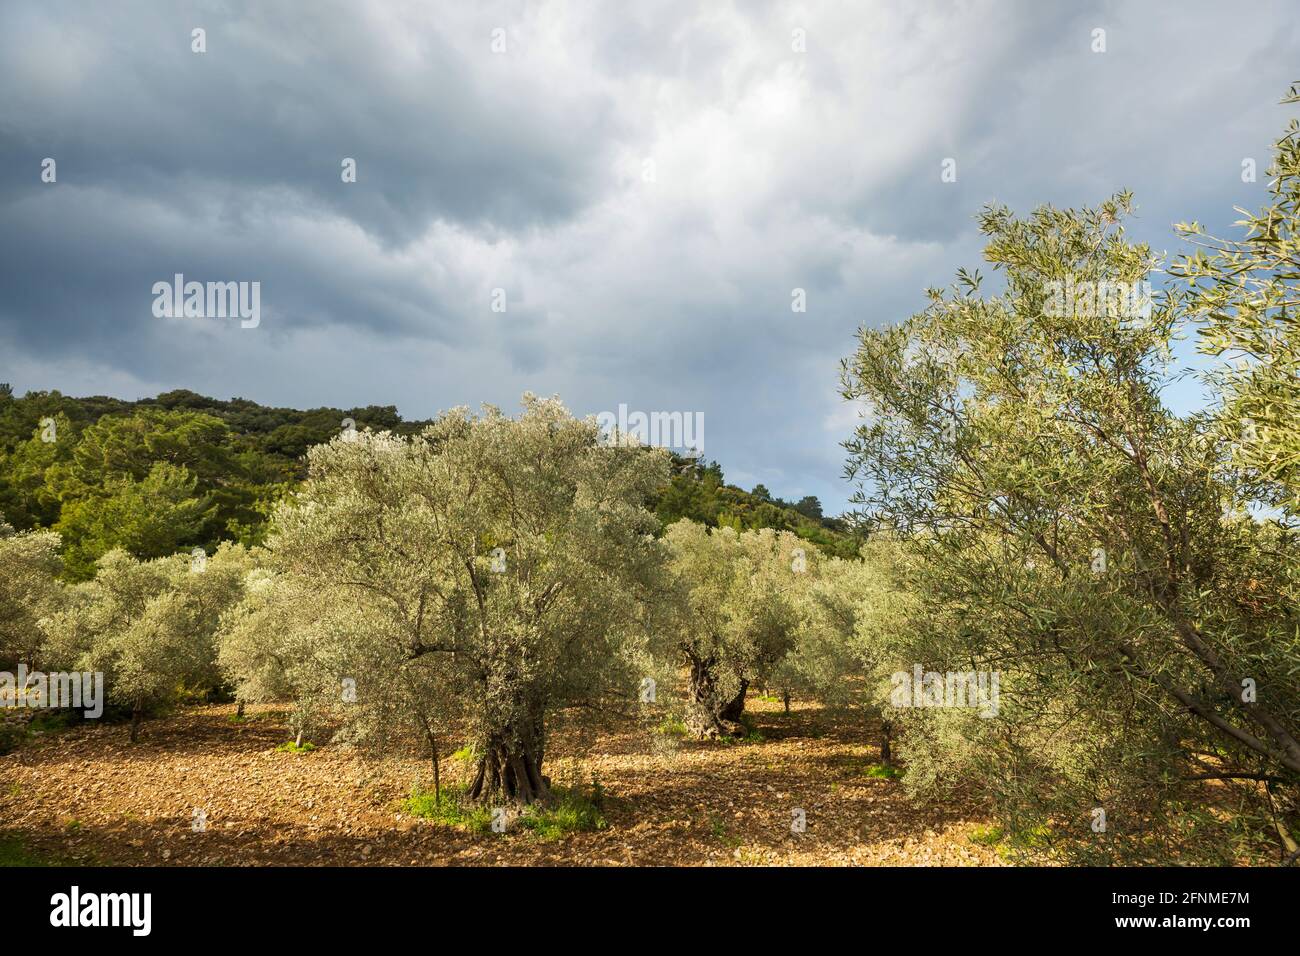 Olive trees in Turkey mountains Stock Photo